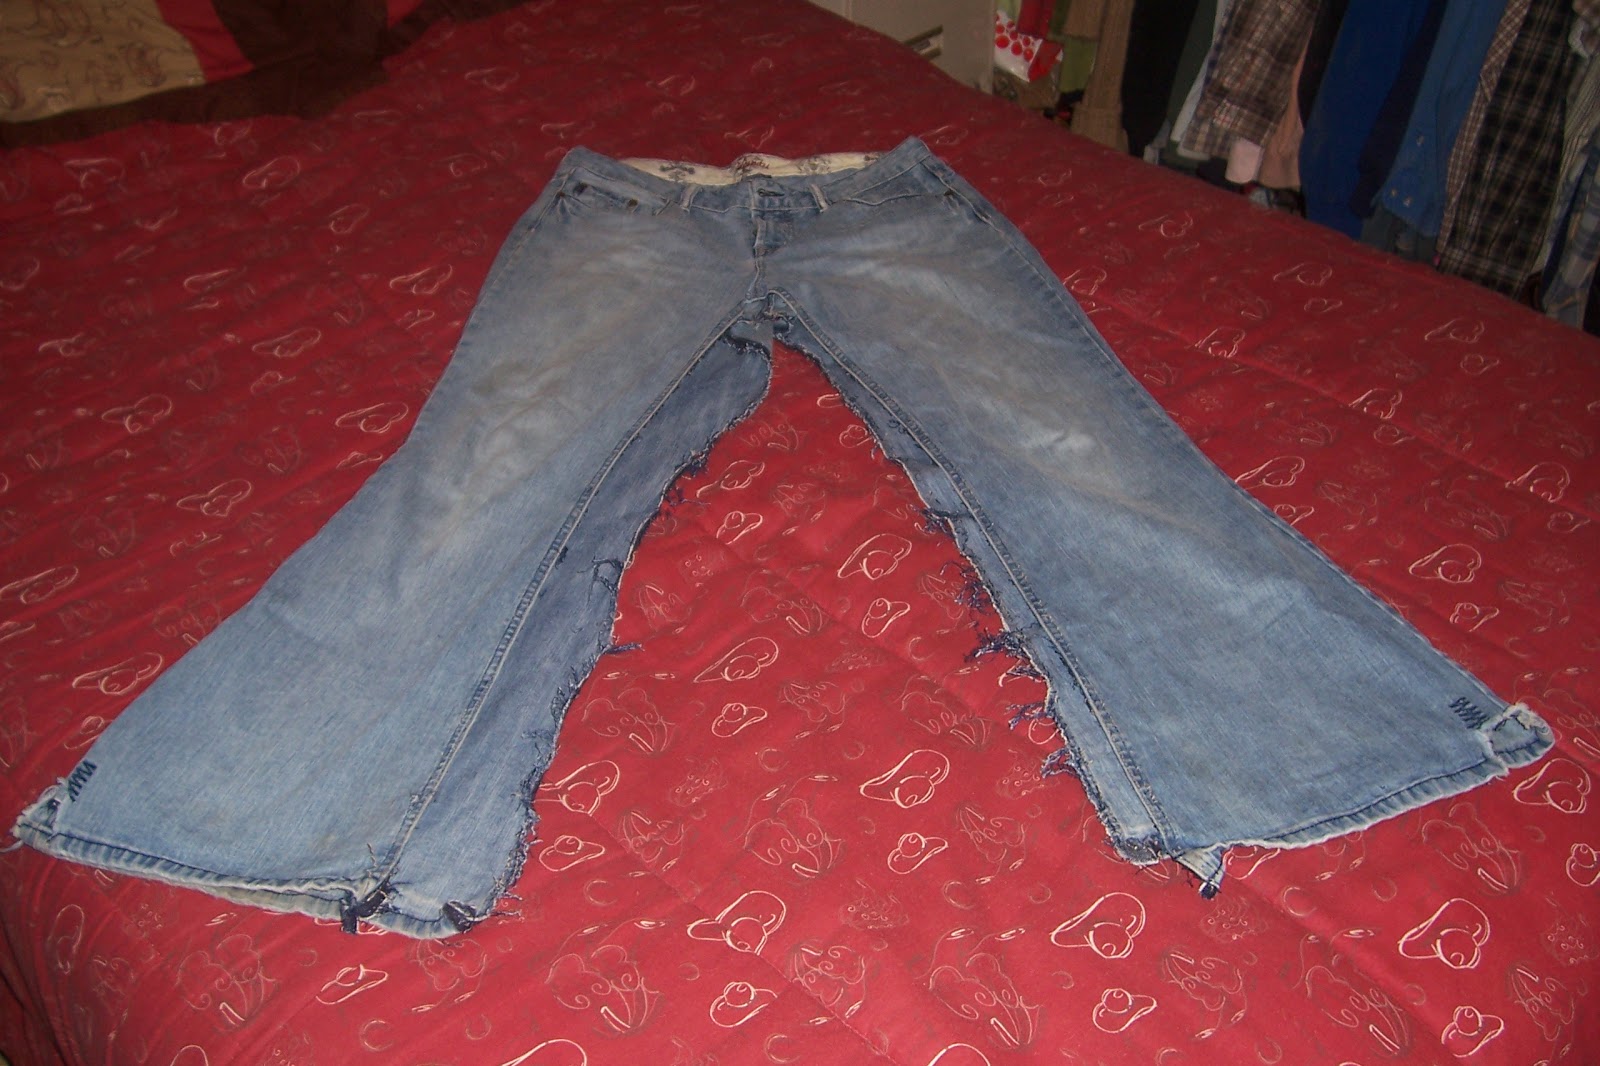 Rashel's Run: Making a skirt from a pair of jeans